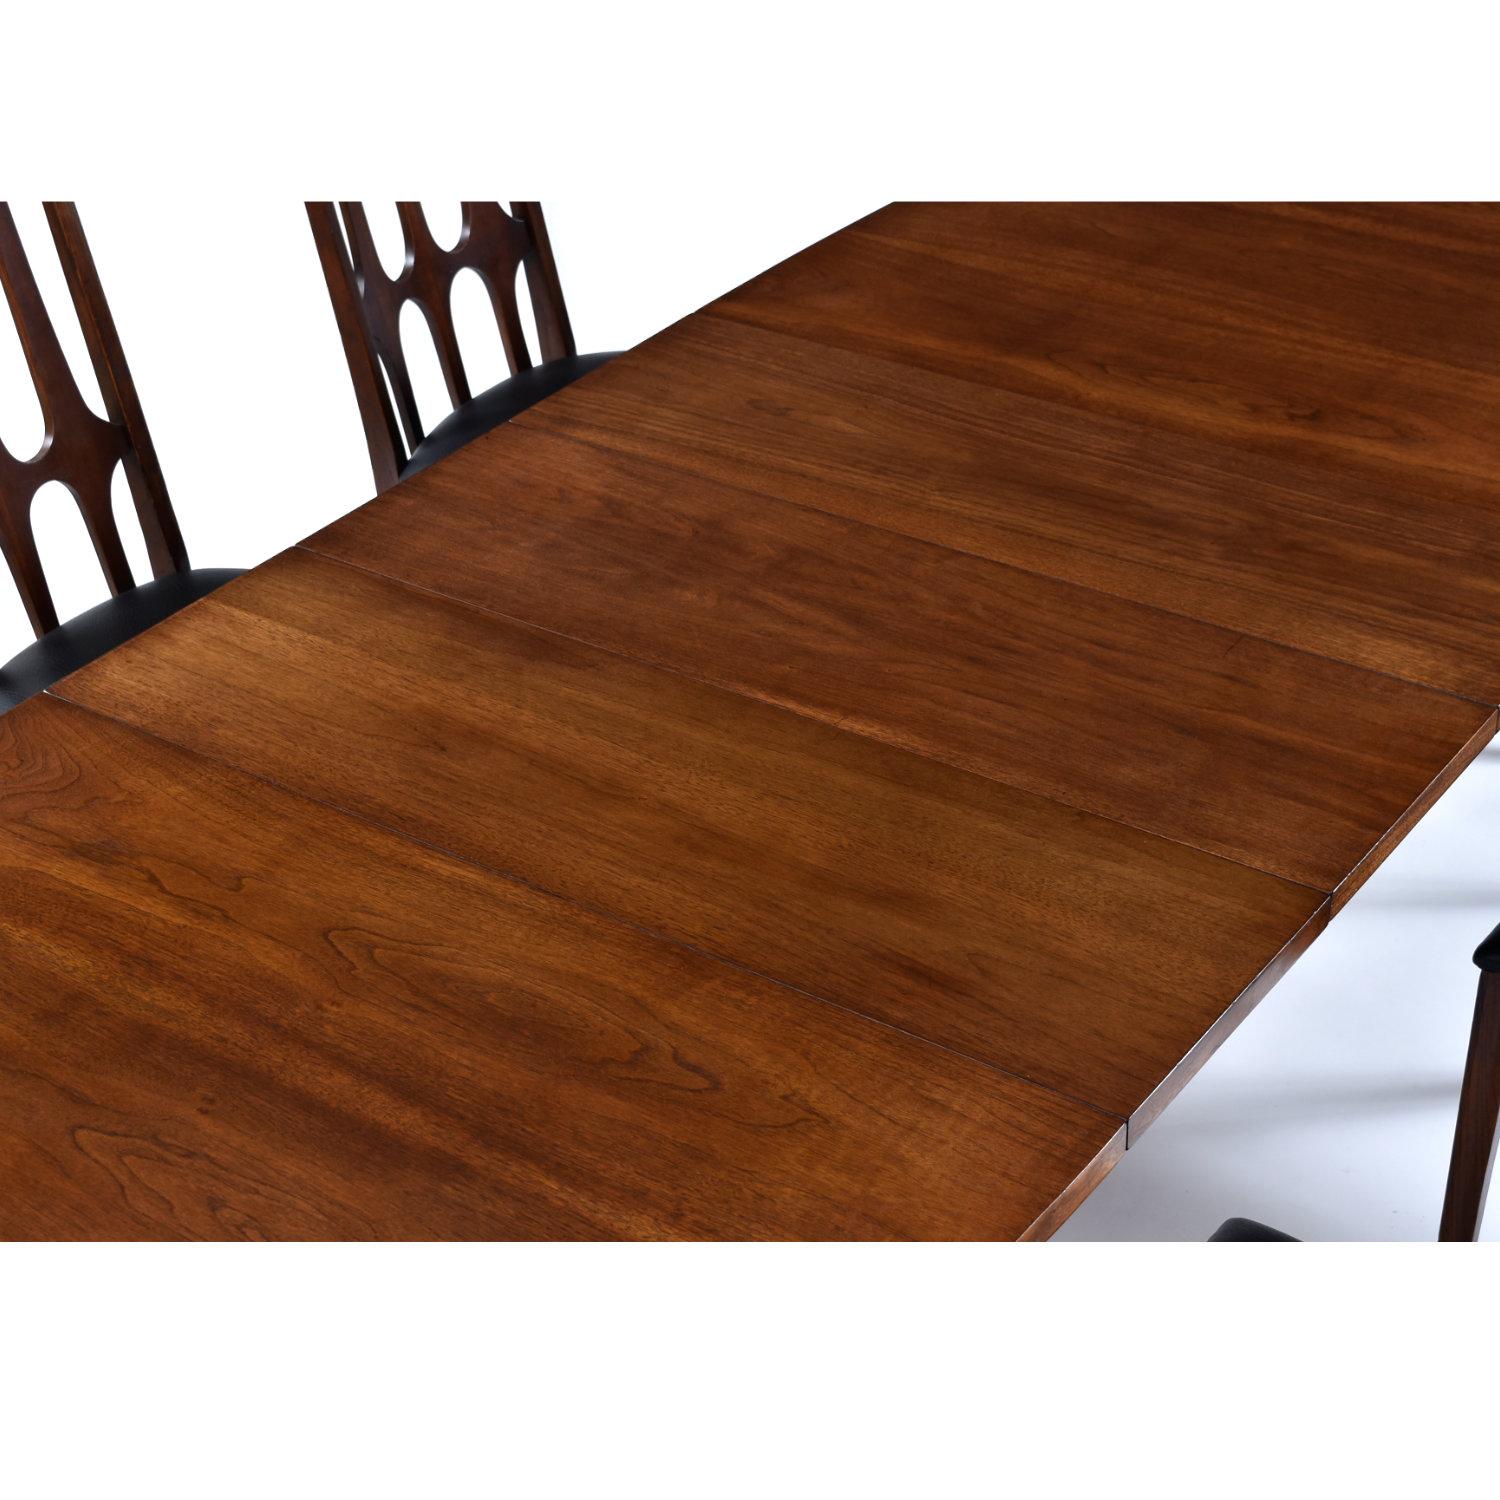 Restored Broyhill Brasilia Dining Set with Expanding Table and 8 Chairs 5